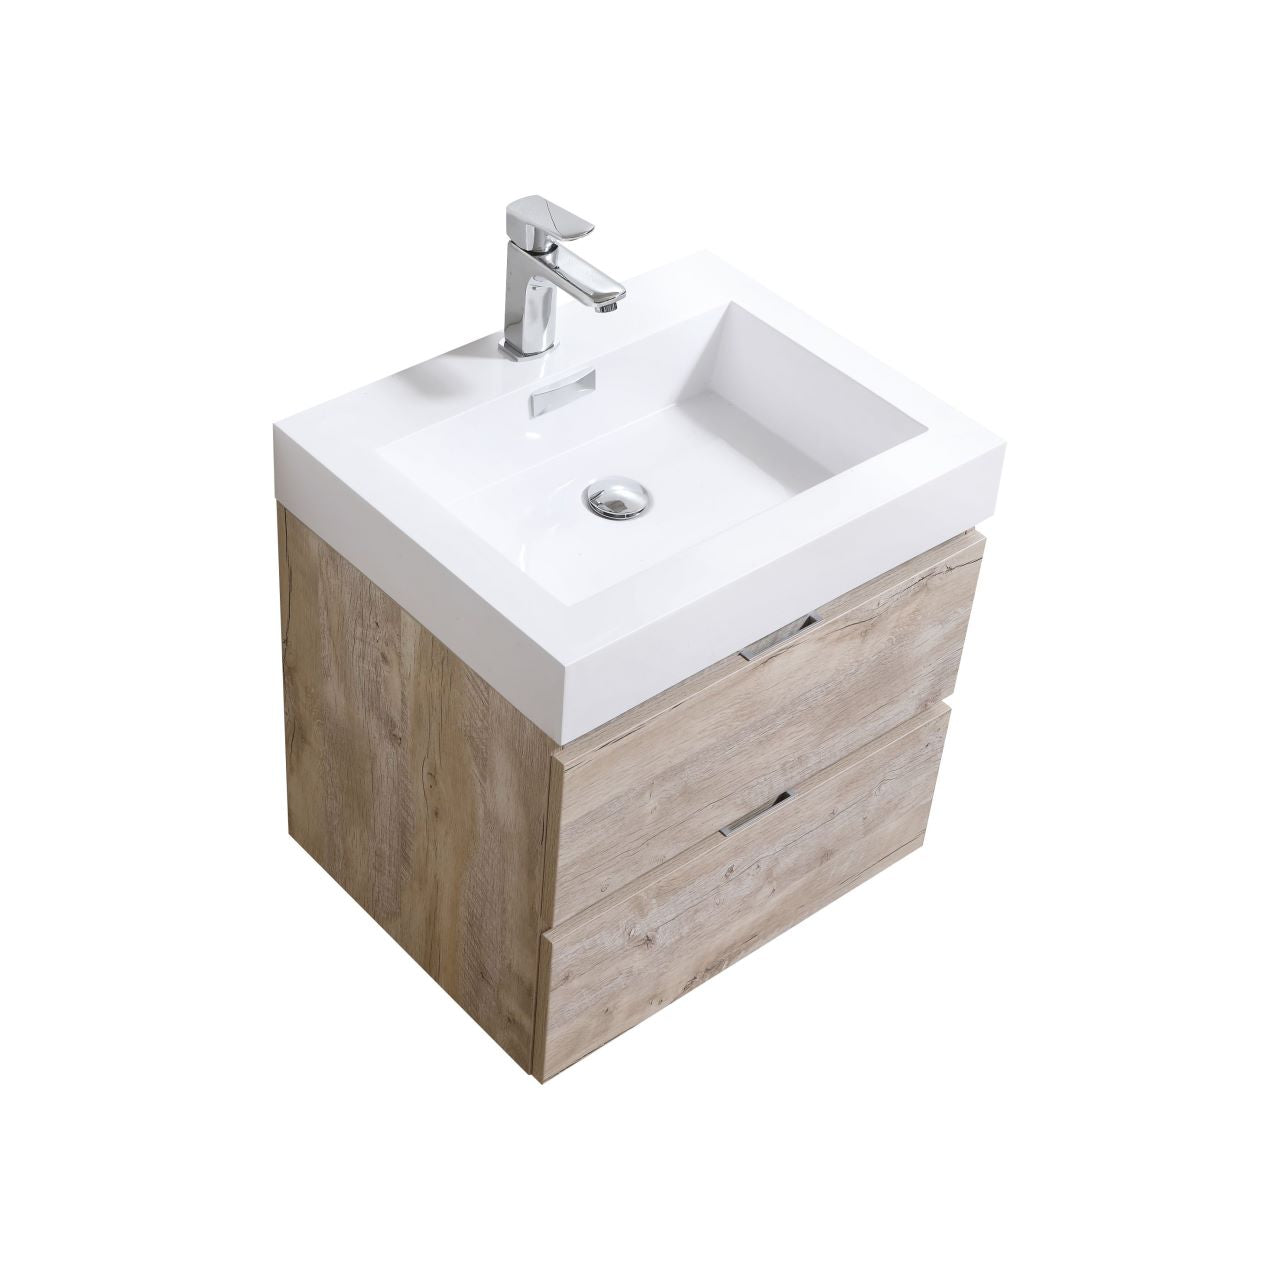 KUBEBATH Bliss BSL24-NW 24" Single Wall Mount Bathroom Vanity in Nature Wood with White Acrylic Composite, Integrated Sink, Angled View